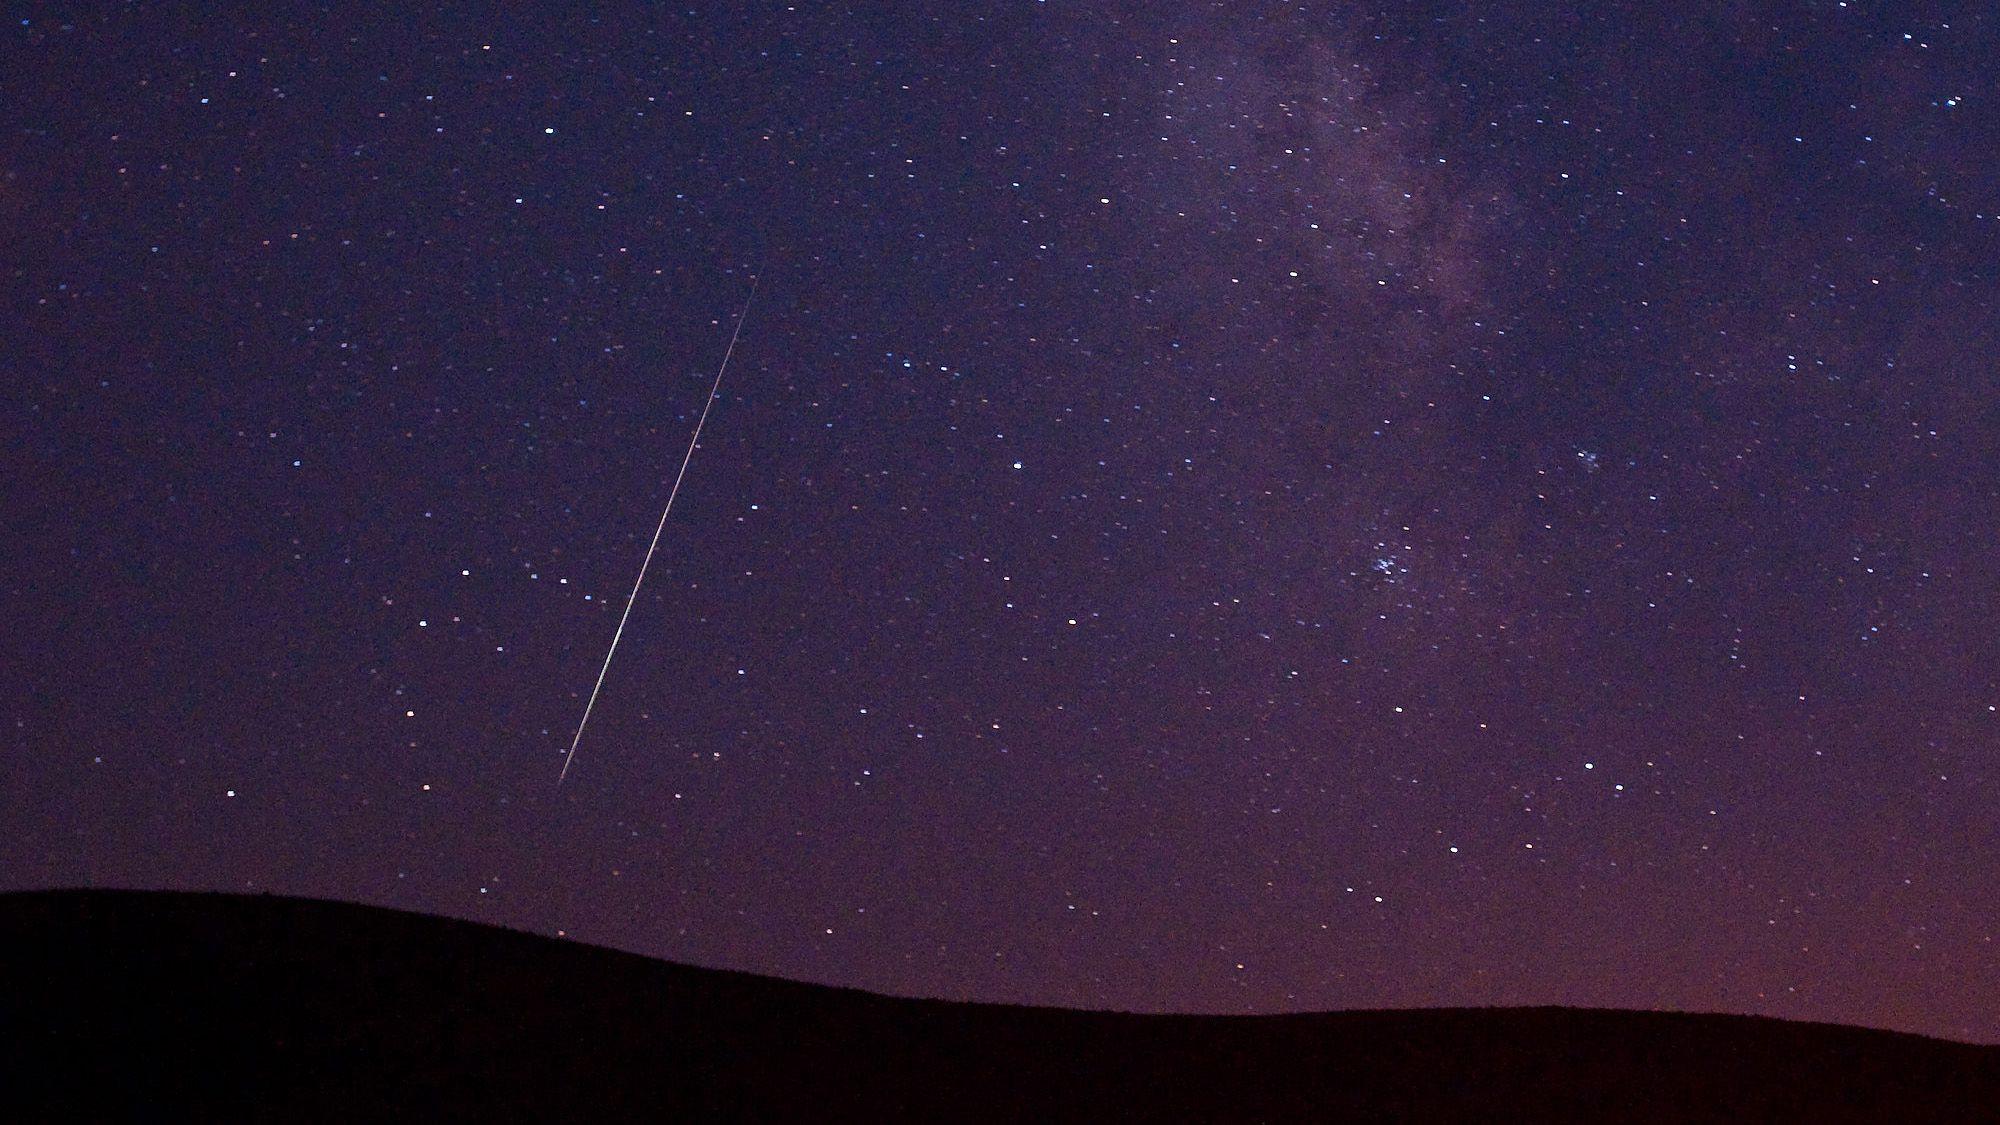 How to watch the Delta Aquarid meteor shower